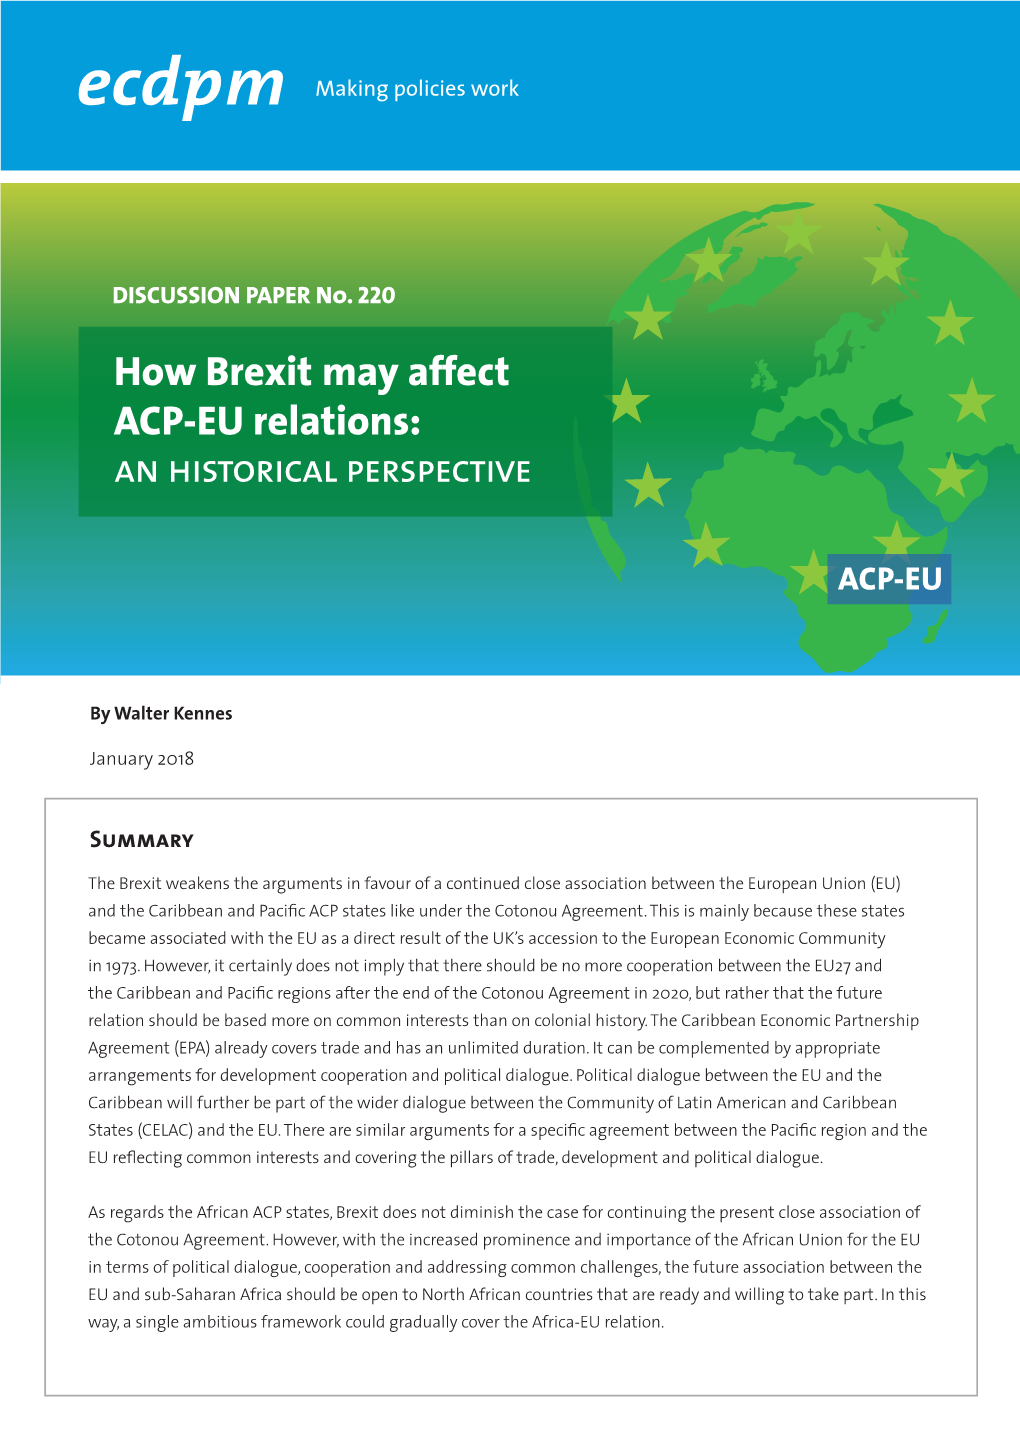 How Brexit May Affect ACP-EU Relations: an Historical Perspective